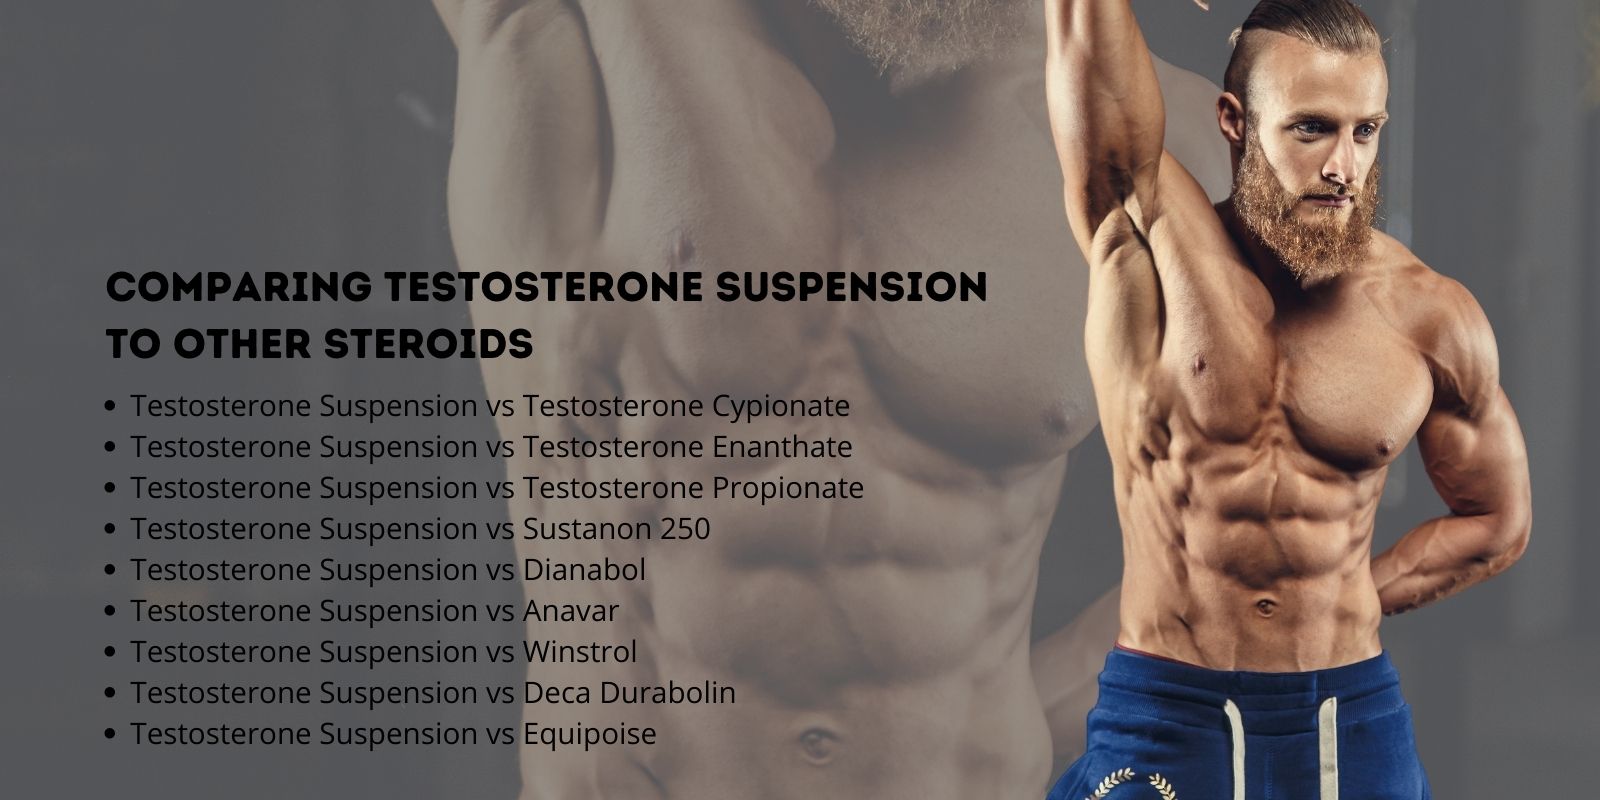 Comparing Testosterone Suspension to other steroids